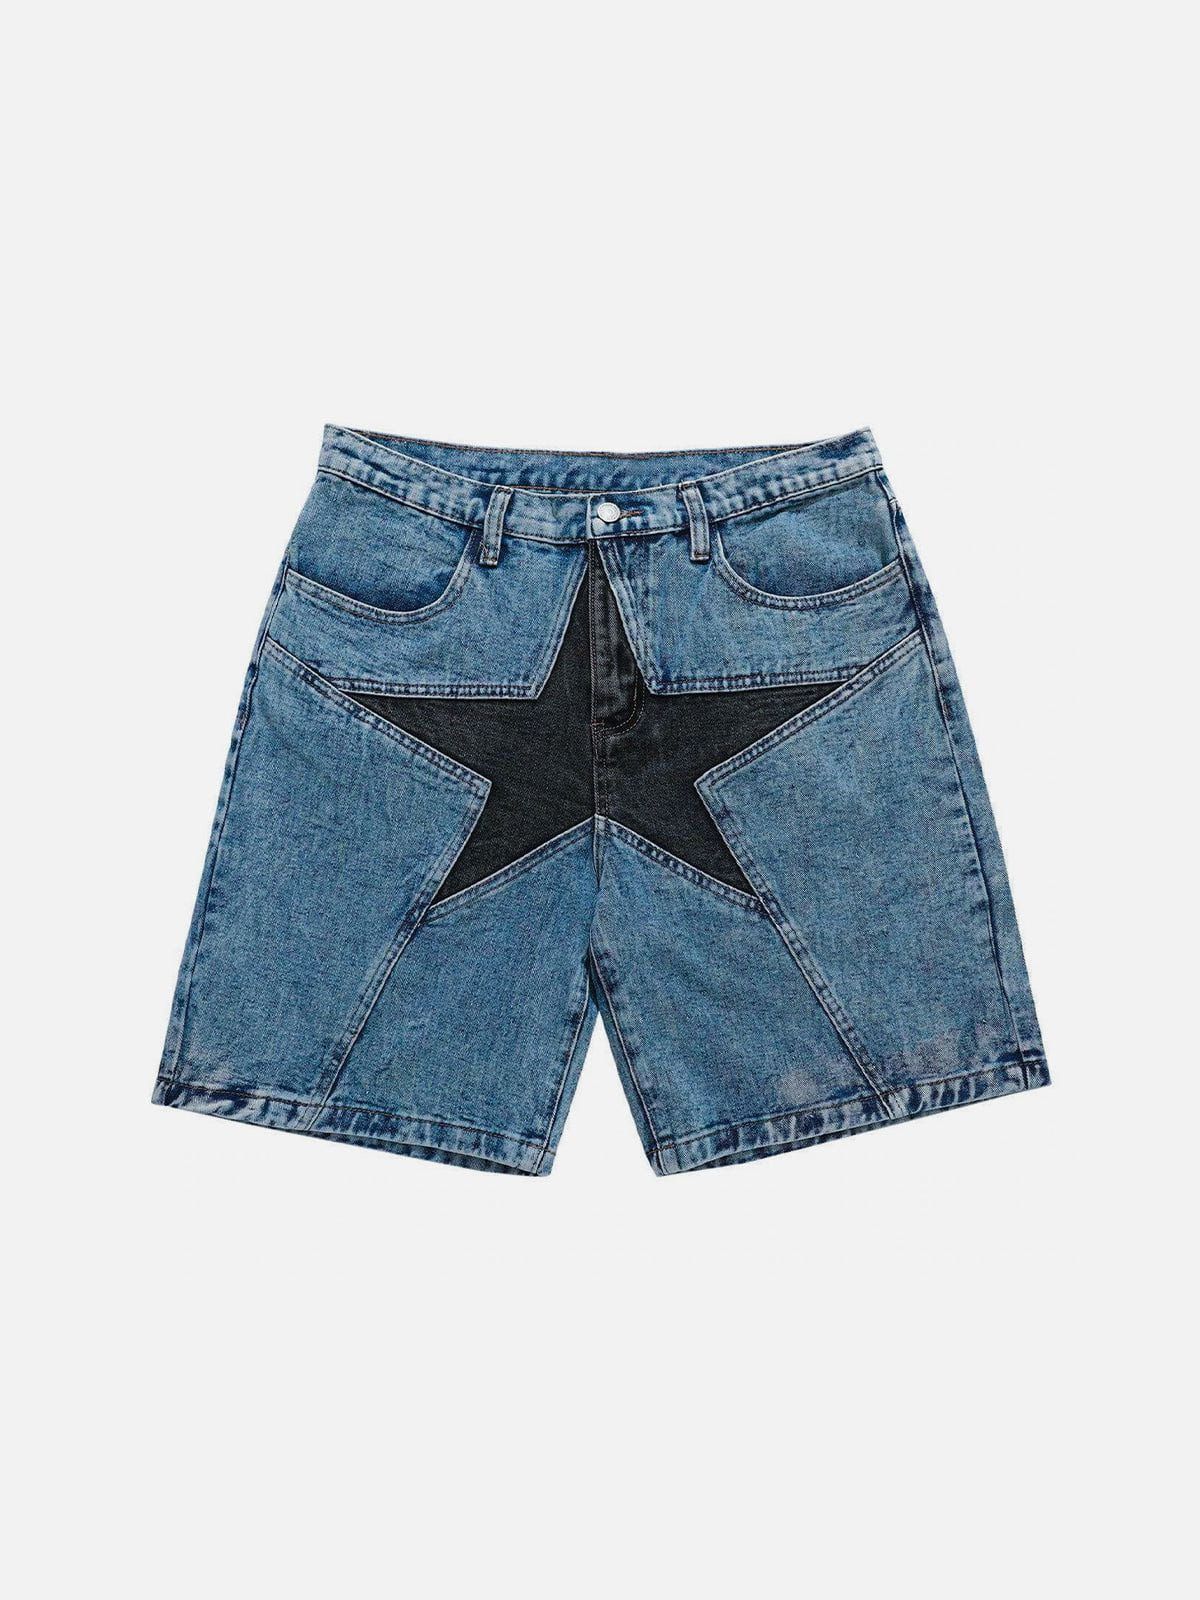 Fandom
  Yourself With These Denim Shorts